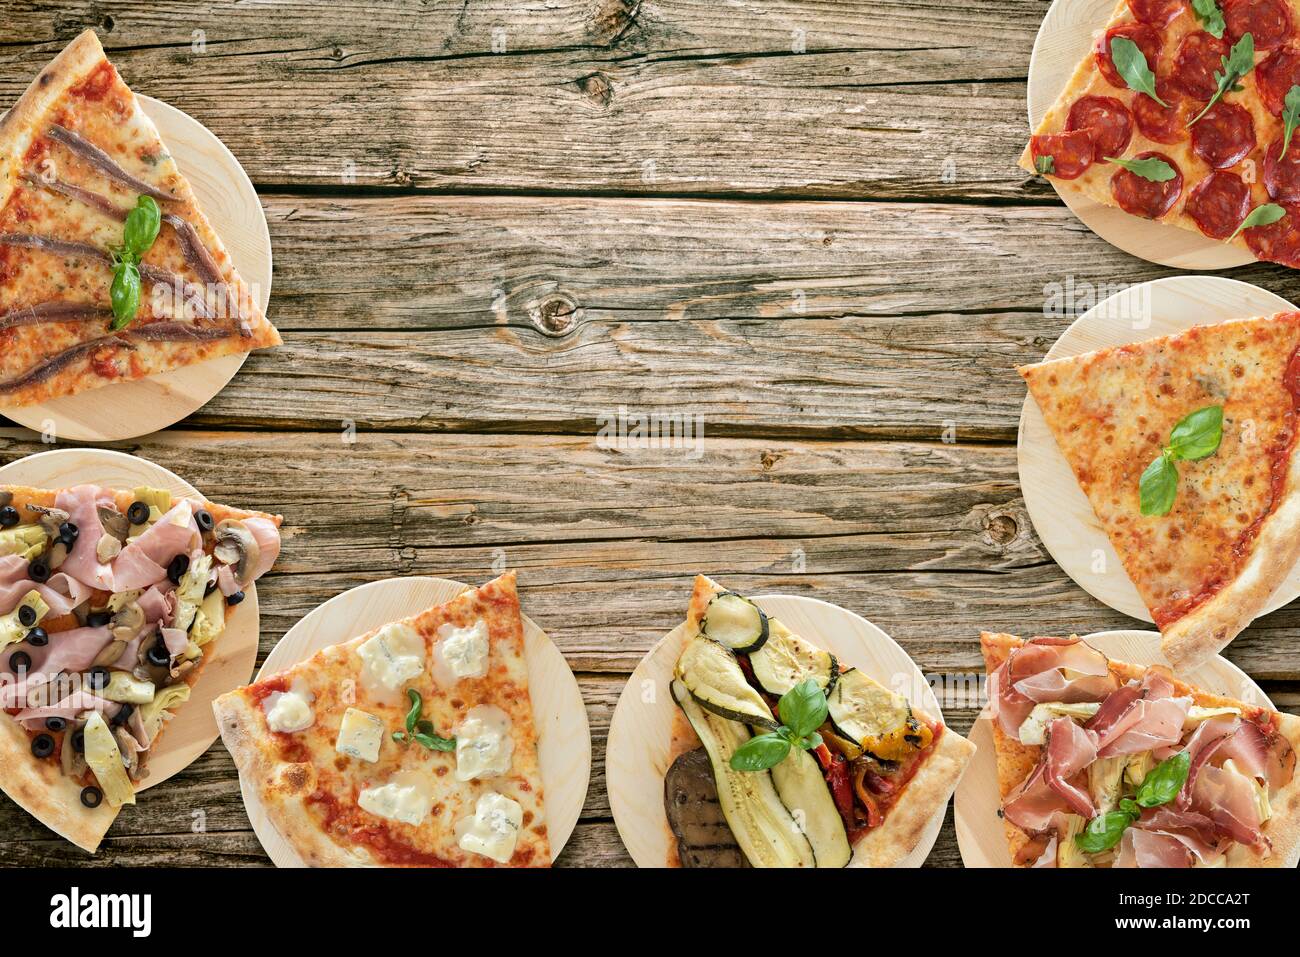 Top view of pizza slices variety on wooden cutting boards Stock Photo